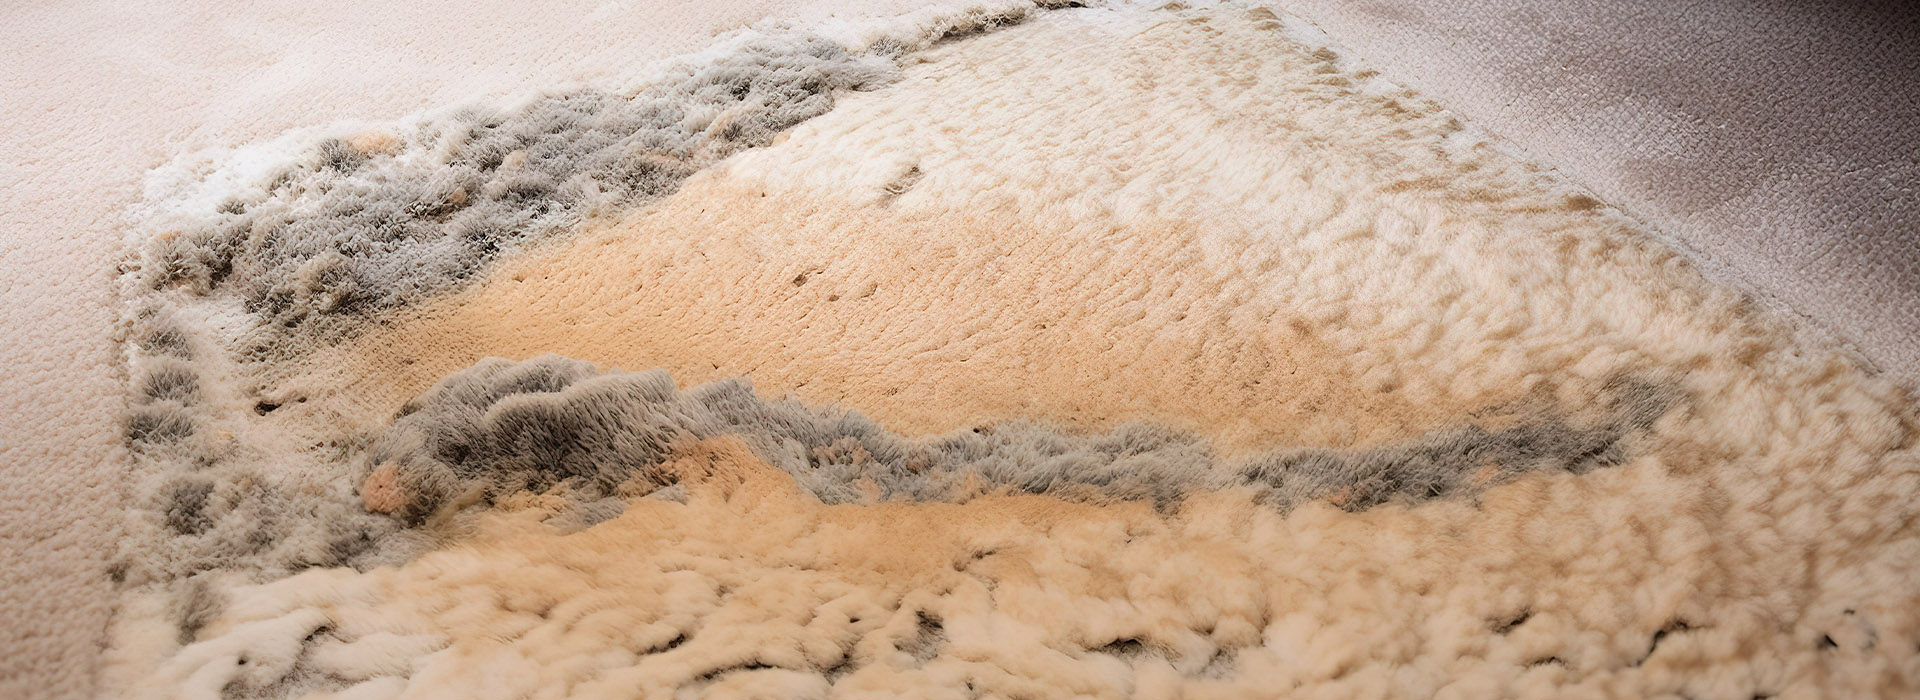 Effective Mould Removal from Furniture | Organic Carpet Cleaning